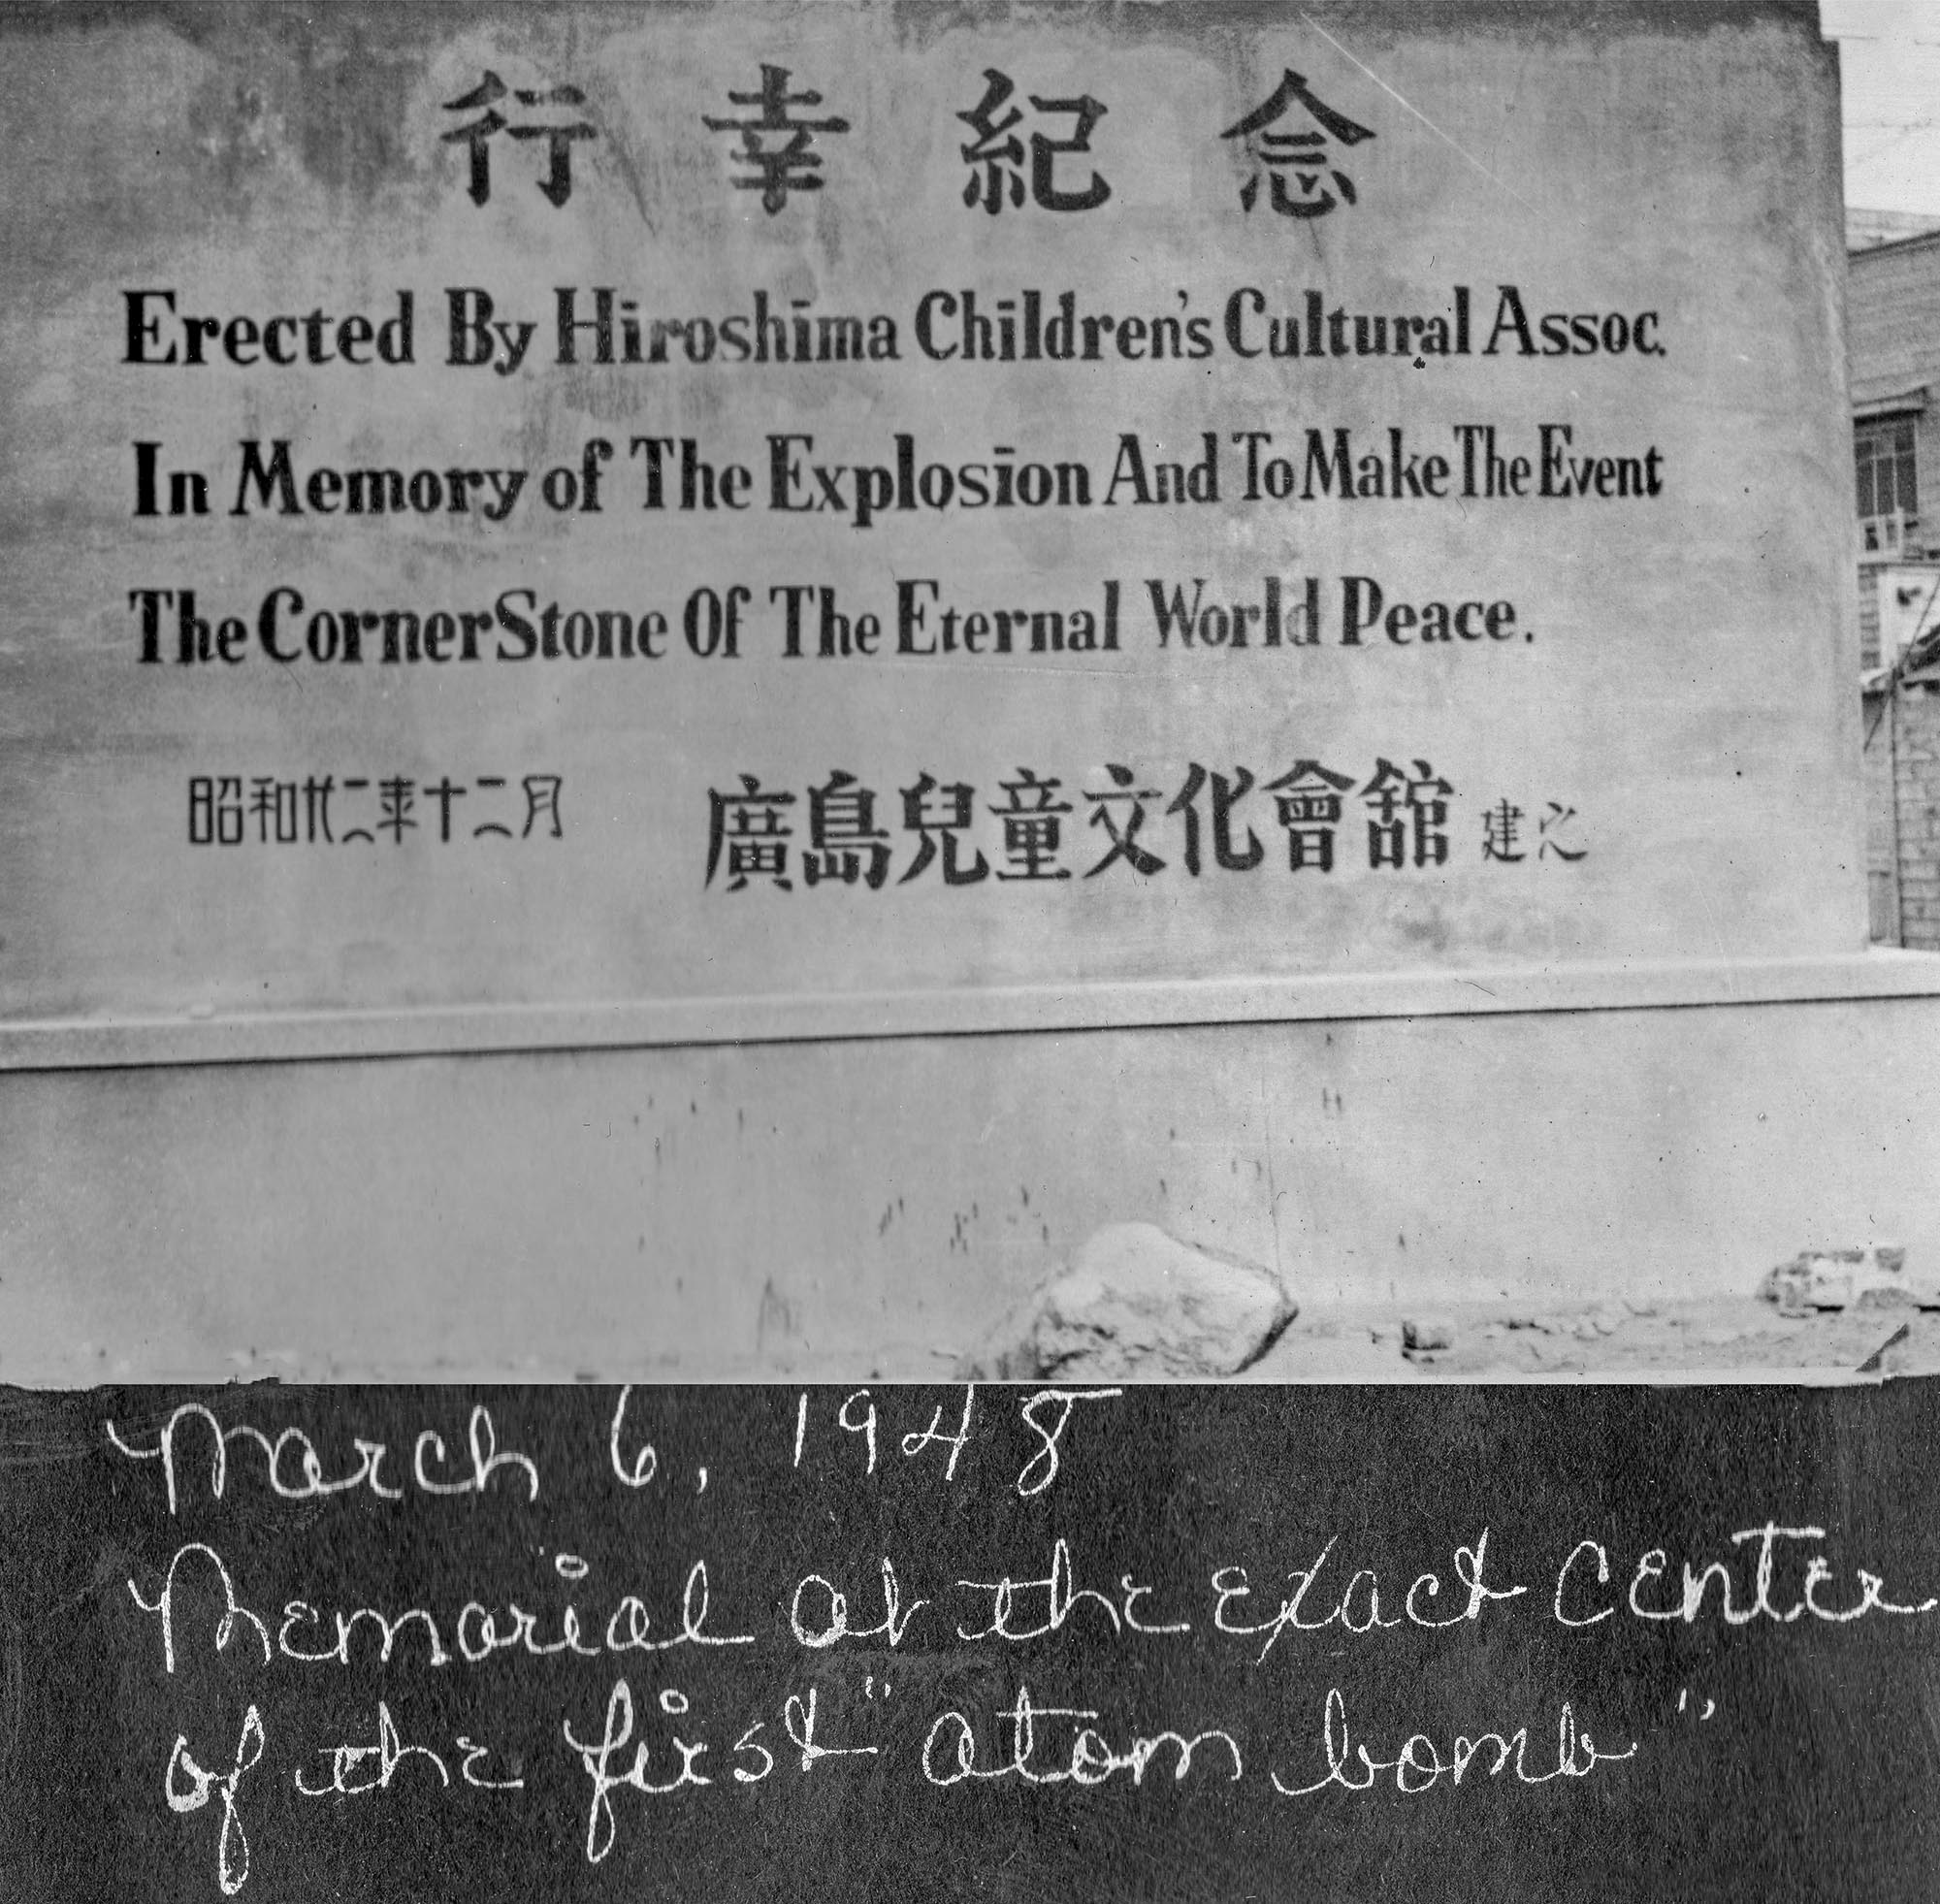 "Erected By Hiroshima Children's Cultural Assoc In Memory of The Explosion And To Make The Event The CornerStone Of the Eternal World Peace." Sign at Genbaku Dome, part of the Hiroshima Peace Memorial Park in Hiroshima, Japan. The Genbaku Dome was the only structure left standing at the center of where the first atomic bomb exploded. Picture taken on March 6, 1948.

Captain Clarence V. Ward was sent with the US Army to provide ophthalmology care to war-refugee Japanese children and adults as well as American Service personnel.

From a photo album titled "Pictures from Japan and Elsewhere." Occupied Japan era, Captain Clarence V. Ward, US Army from 1947-1949, 28th General Hospital, Osaka, Japan. Clarence lived in Peoria, Illinois (Feb. 13, 1922 - June 5, 2009).

Ward served in the US Army from 1947-1949, 28th General Hospital, Osaka, Japan attaining the rank of Captain. He graduated from St. Bernard's Grade School in 1936; Spalding Institute in 1940; University of Notre Dame in 1944 where he earned his BS; and University of St. Louis School of Medicine in 1946. He served his internship at St. John's Hospital in St. Louis, MO from 1946-1947; Post Graduate at Northwestern University in Ophthalmology from 1949-1950; Residency at Hines Veterans Hospital in Hines, IL from 1950-1952 in Ophthalmology. He was an Ophthalmologist full time from 1952-1995 and part time from 1996-2004.